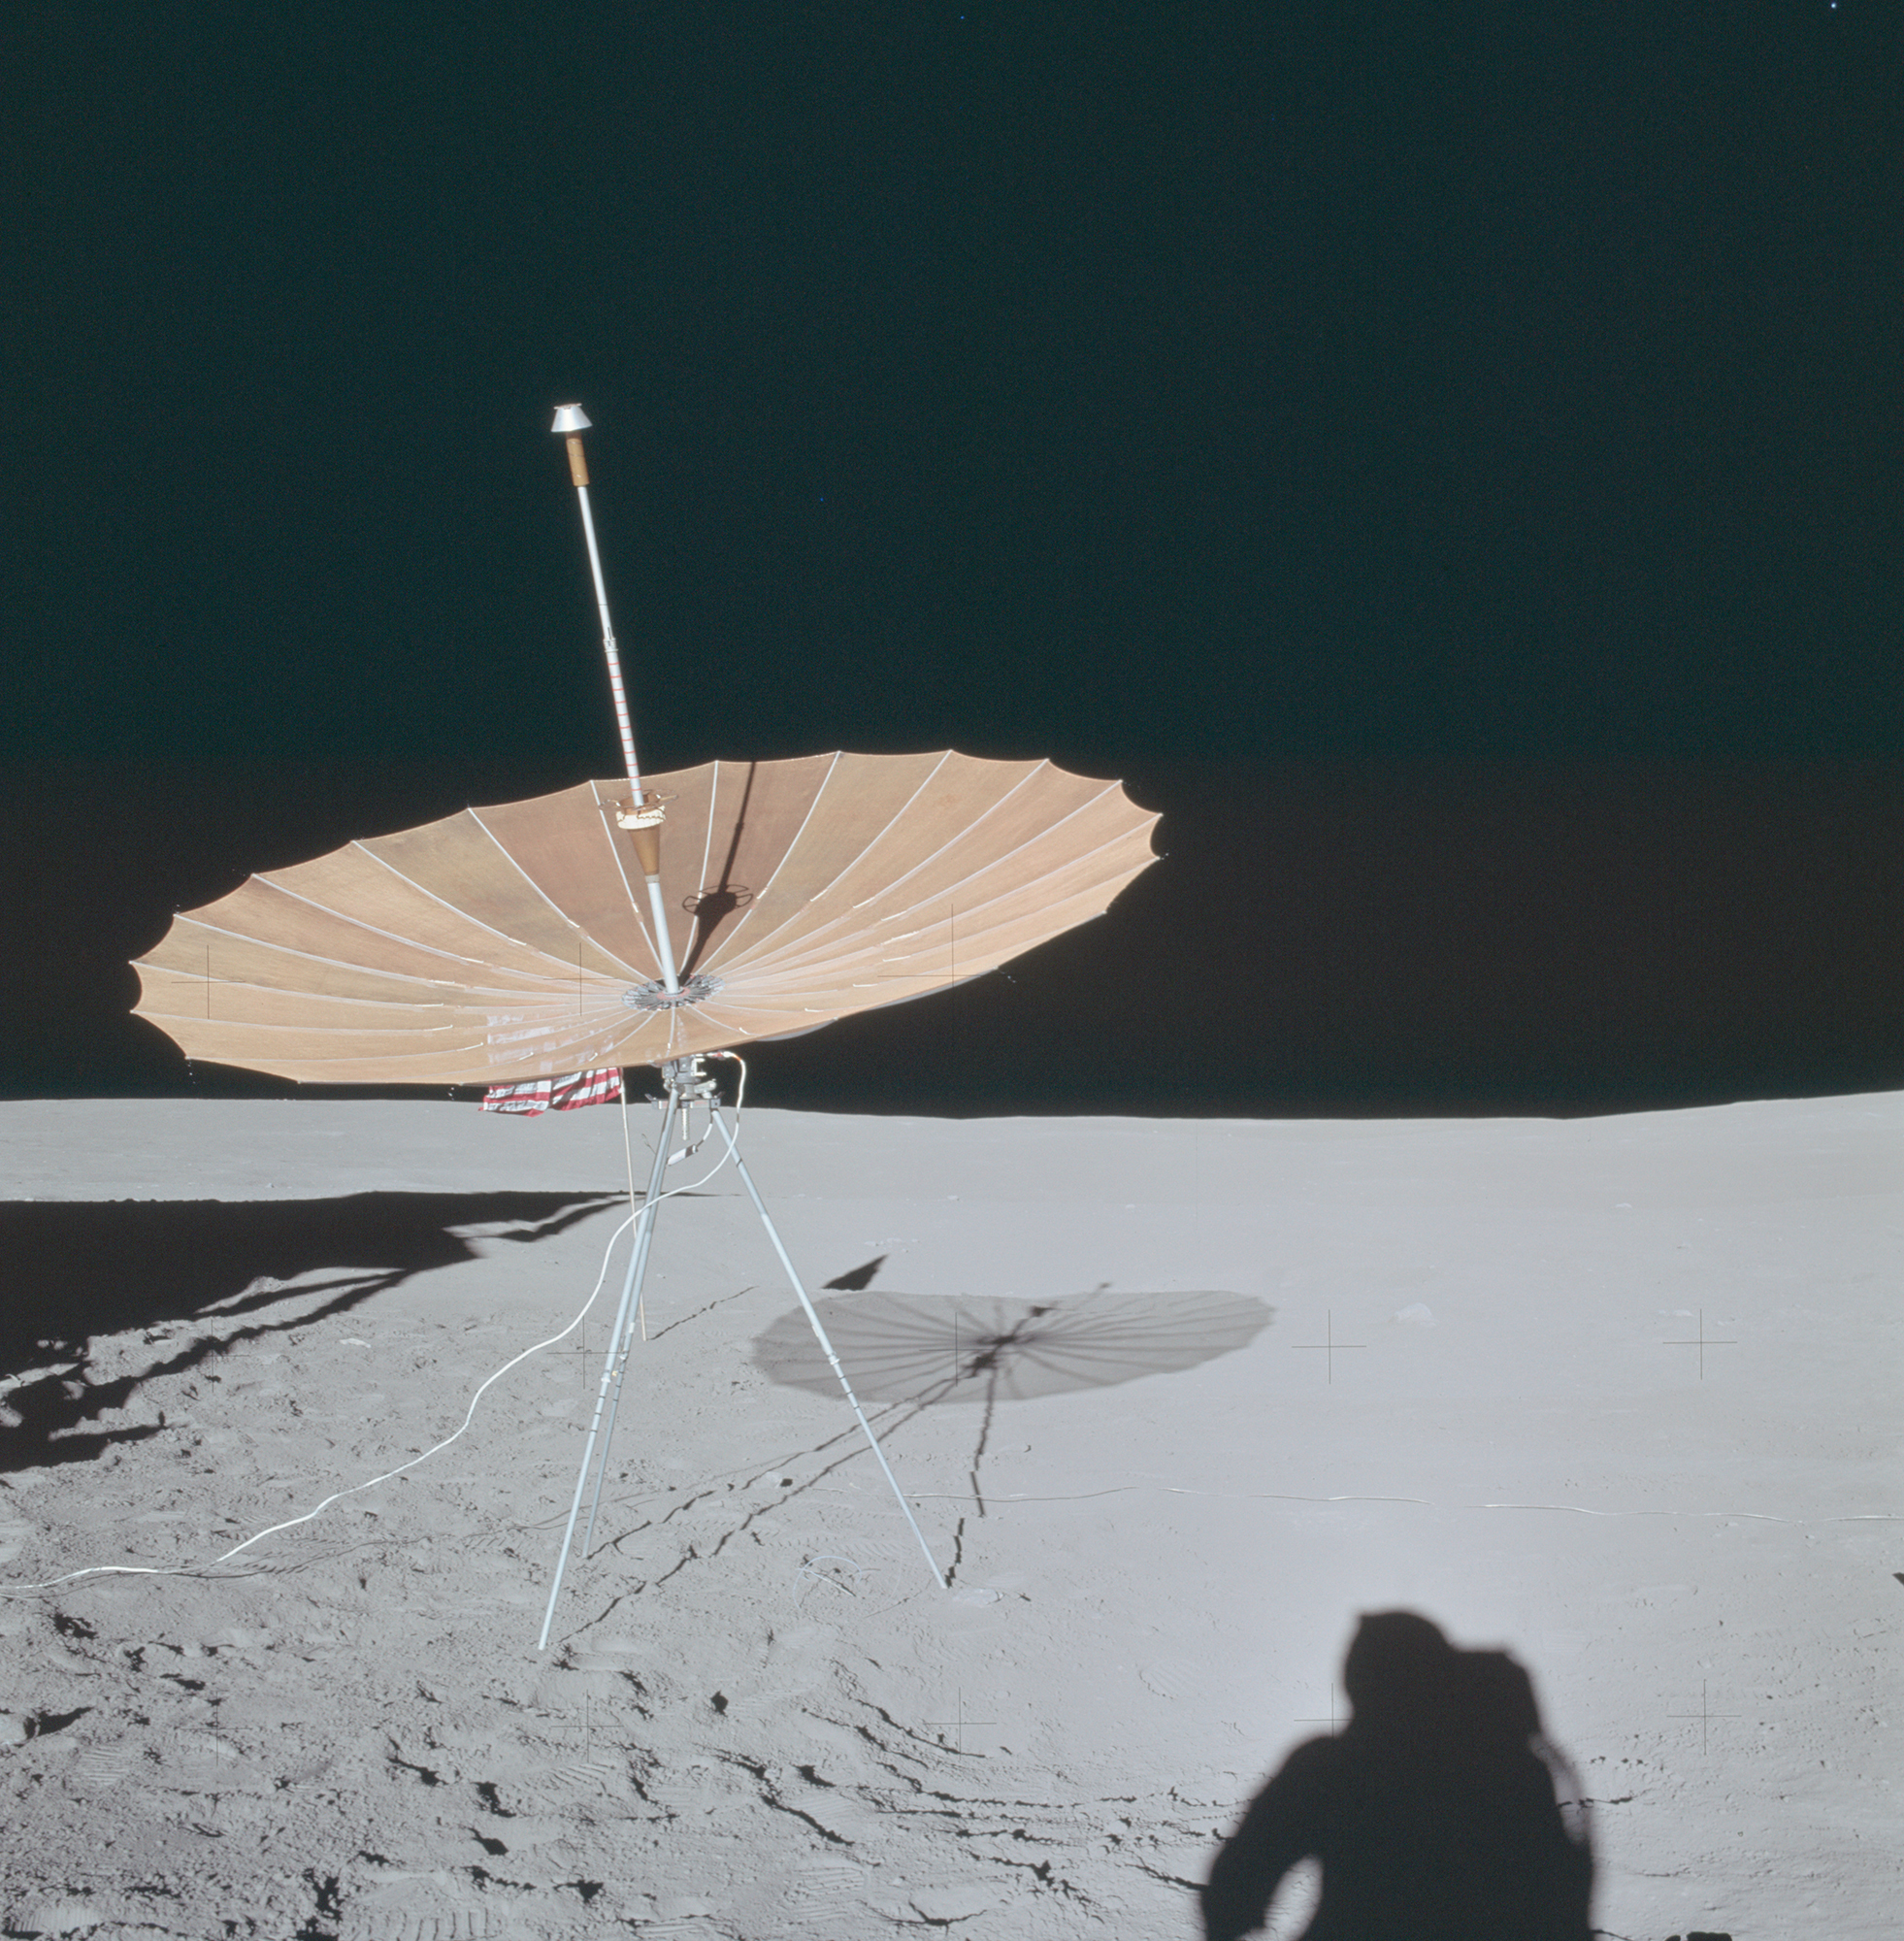 apollo-14-s-band-antenna-and-the-flag-directly-behind-it-on-moon.jpg